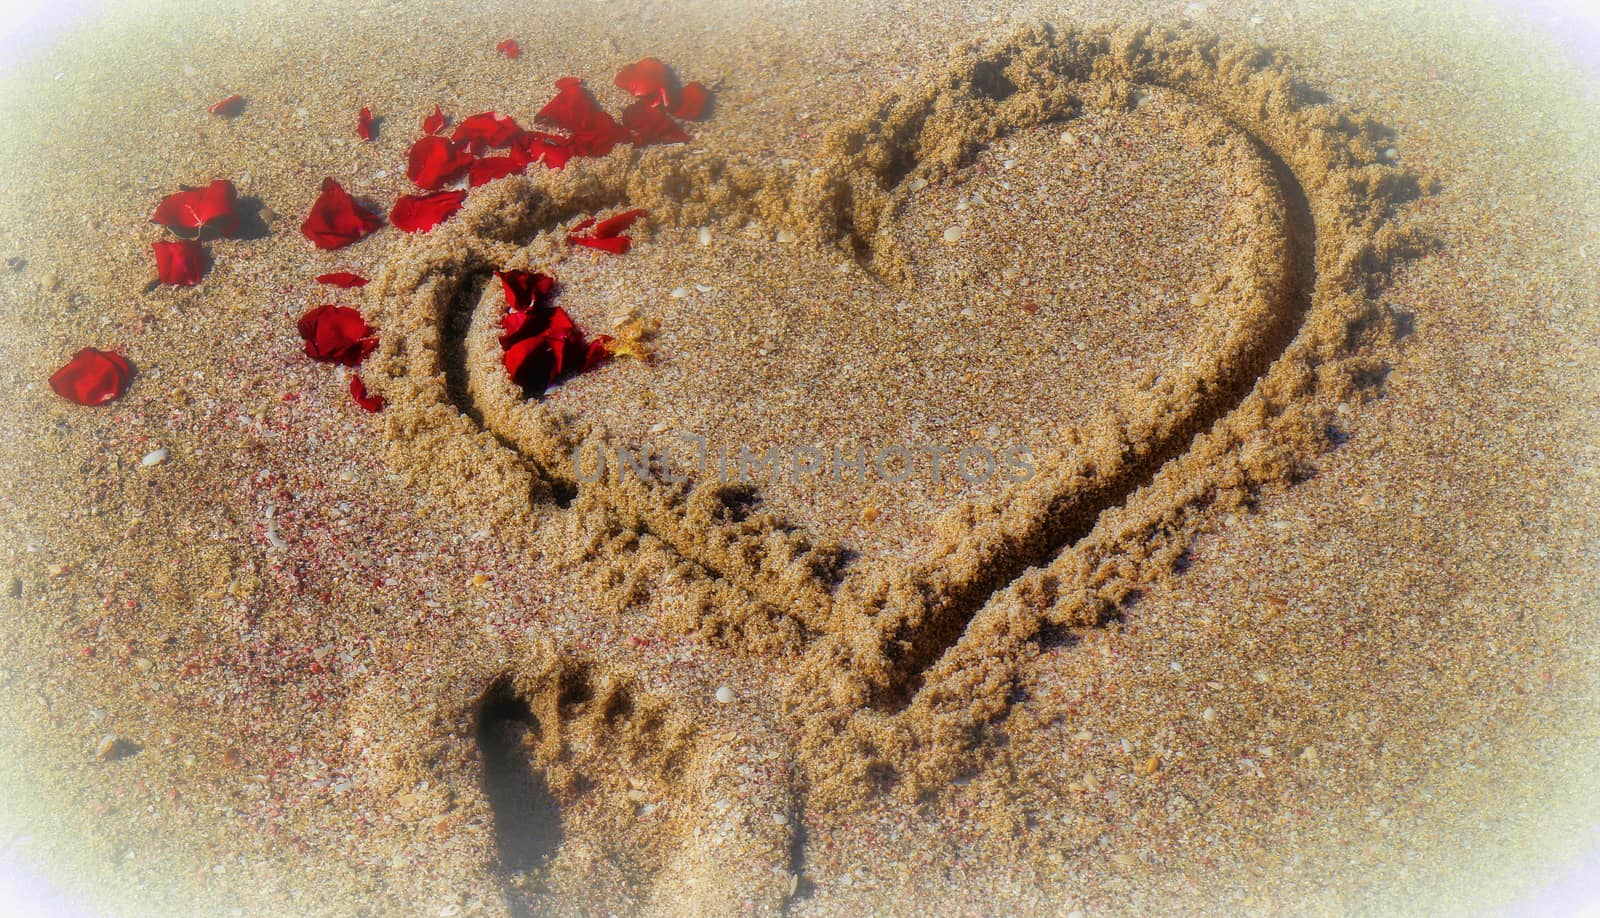 In the sand painted heart with scattered sheets of a rose and a small footprint